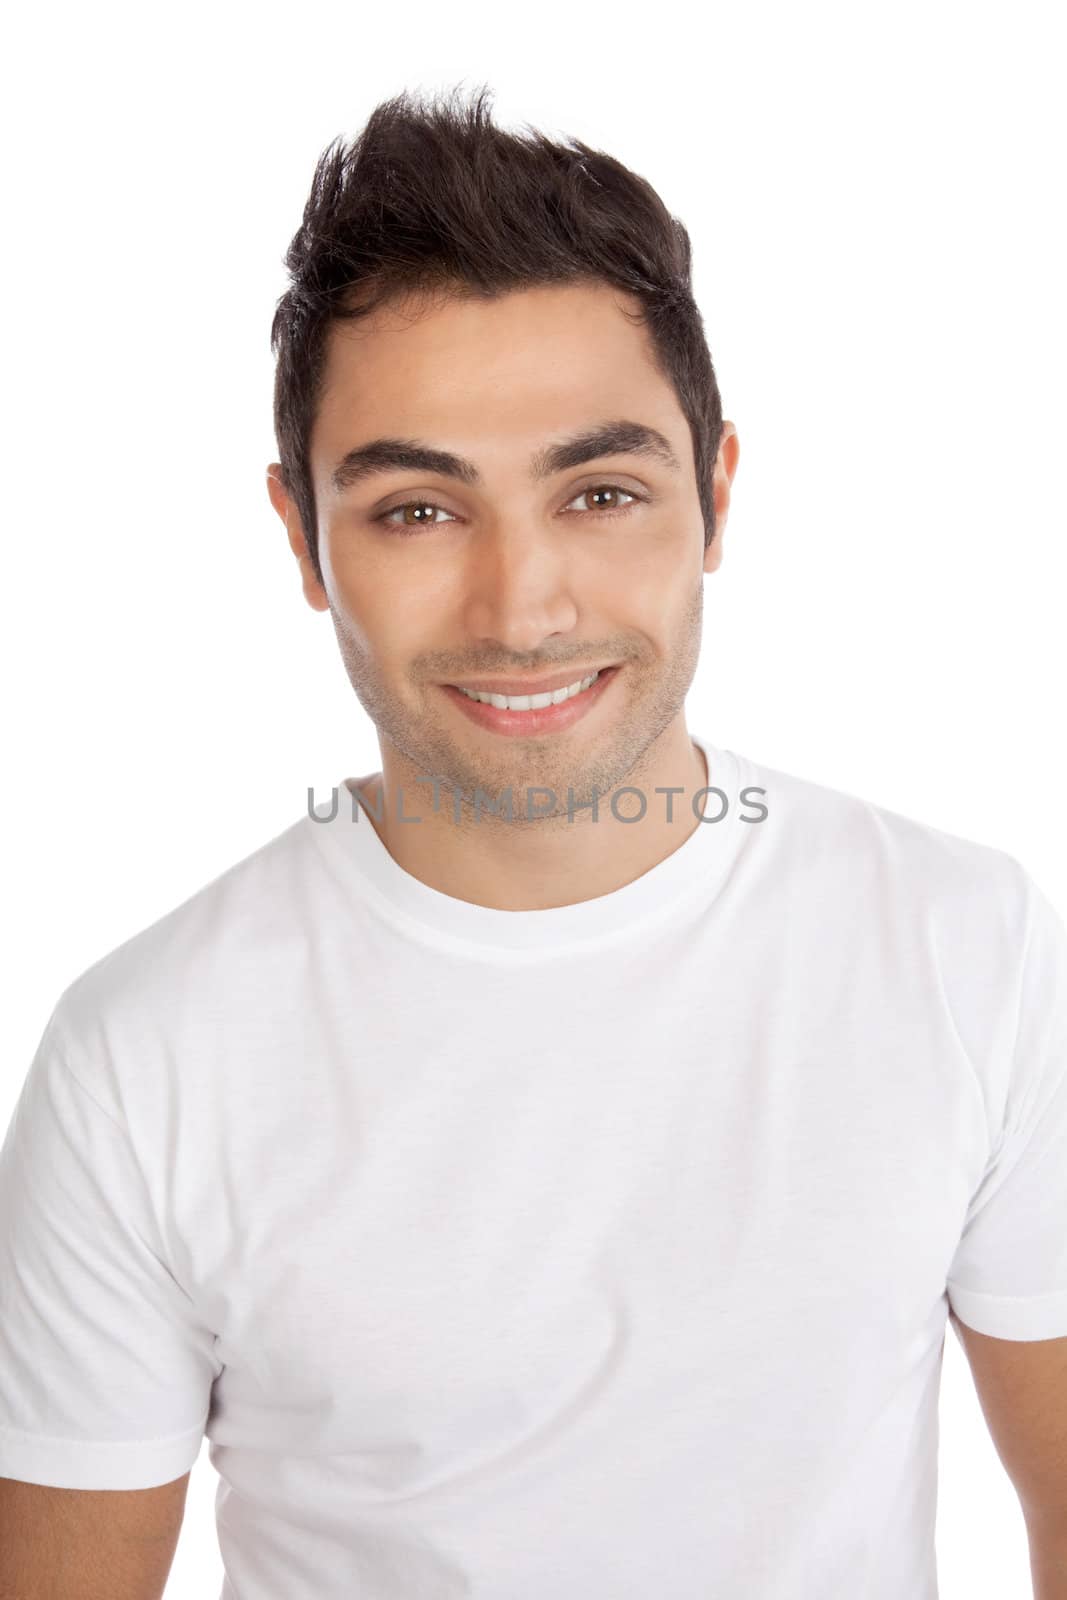 Portrait of happy young man isolated on white background.